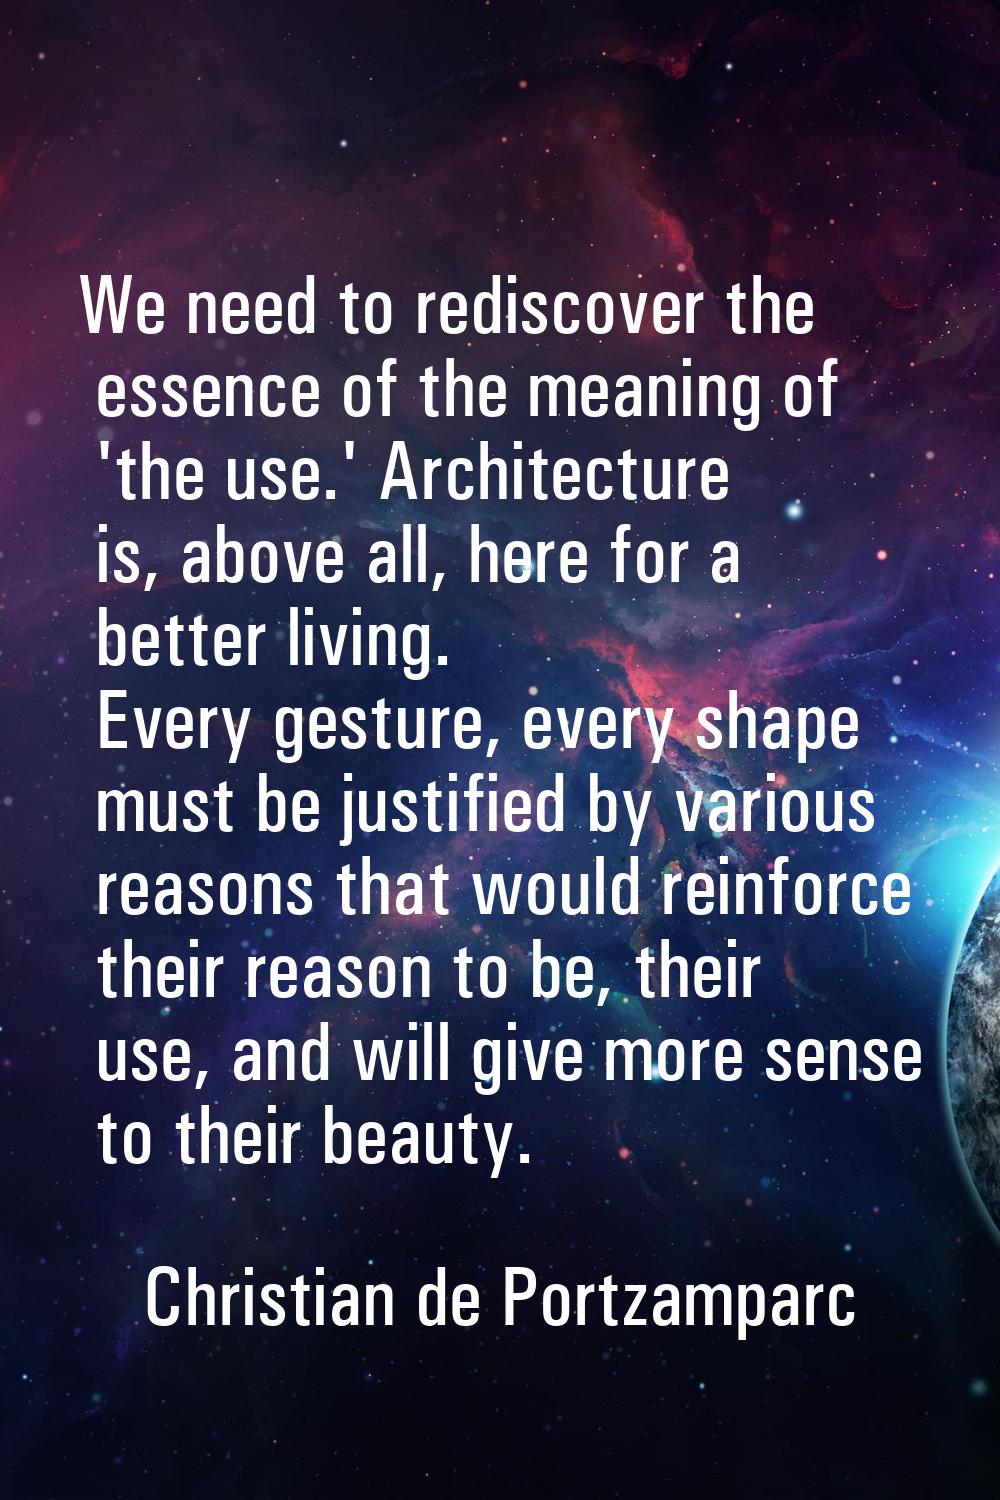 We need to rediscover the essence of the meaning of 'the use.' Architecture is, above all, here for